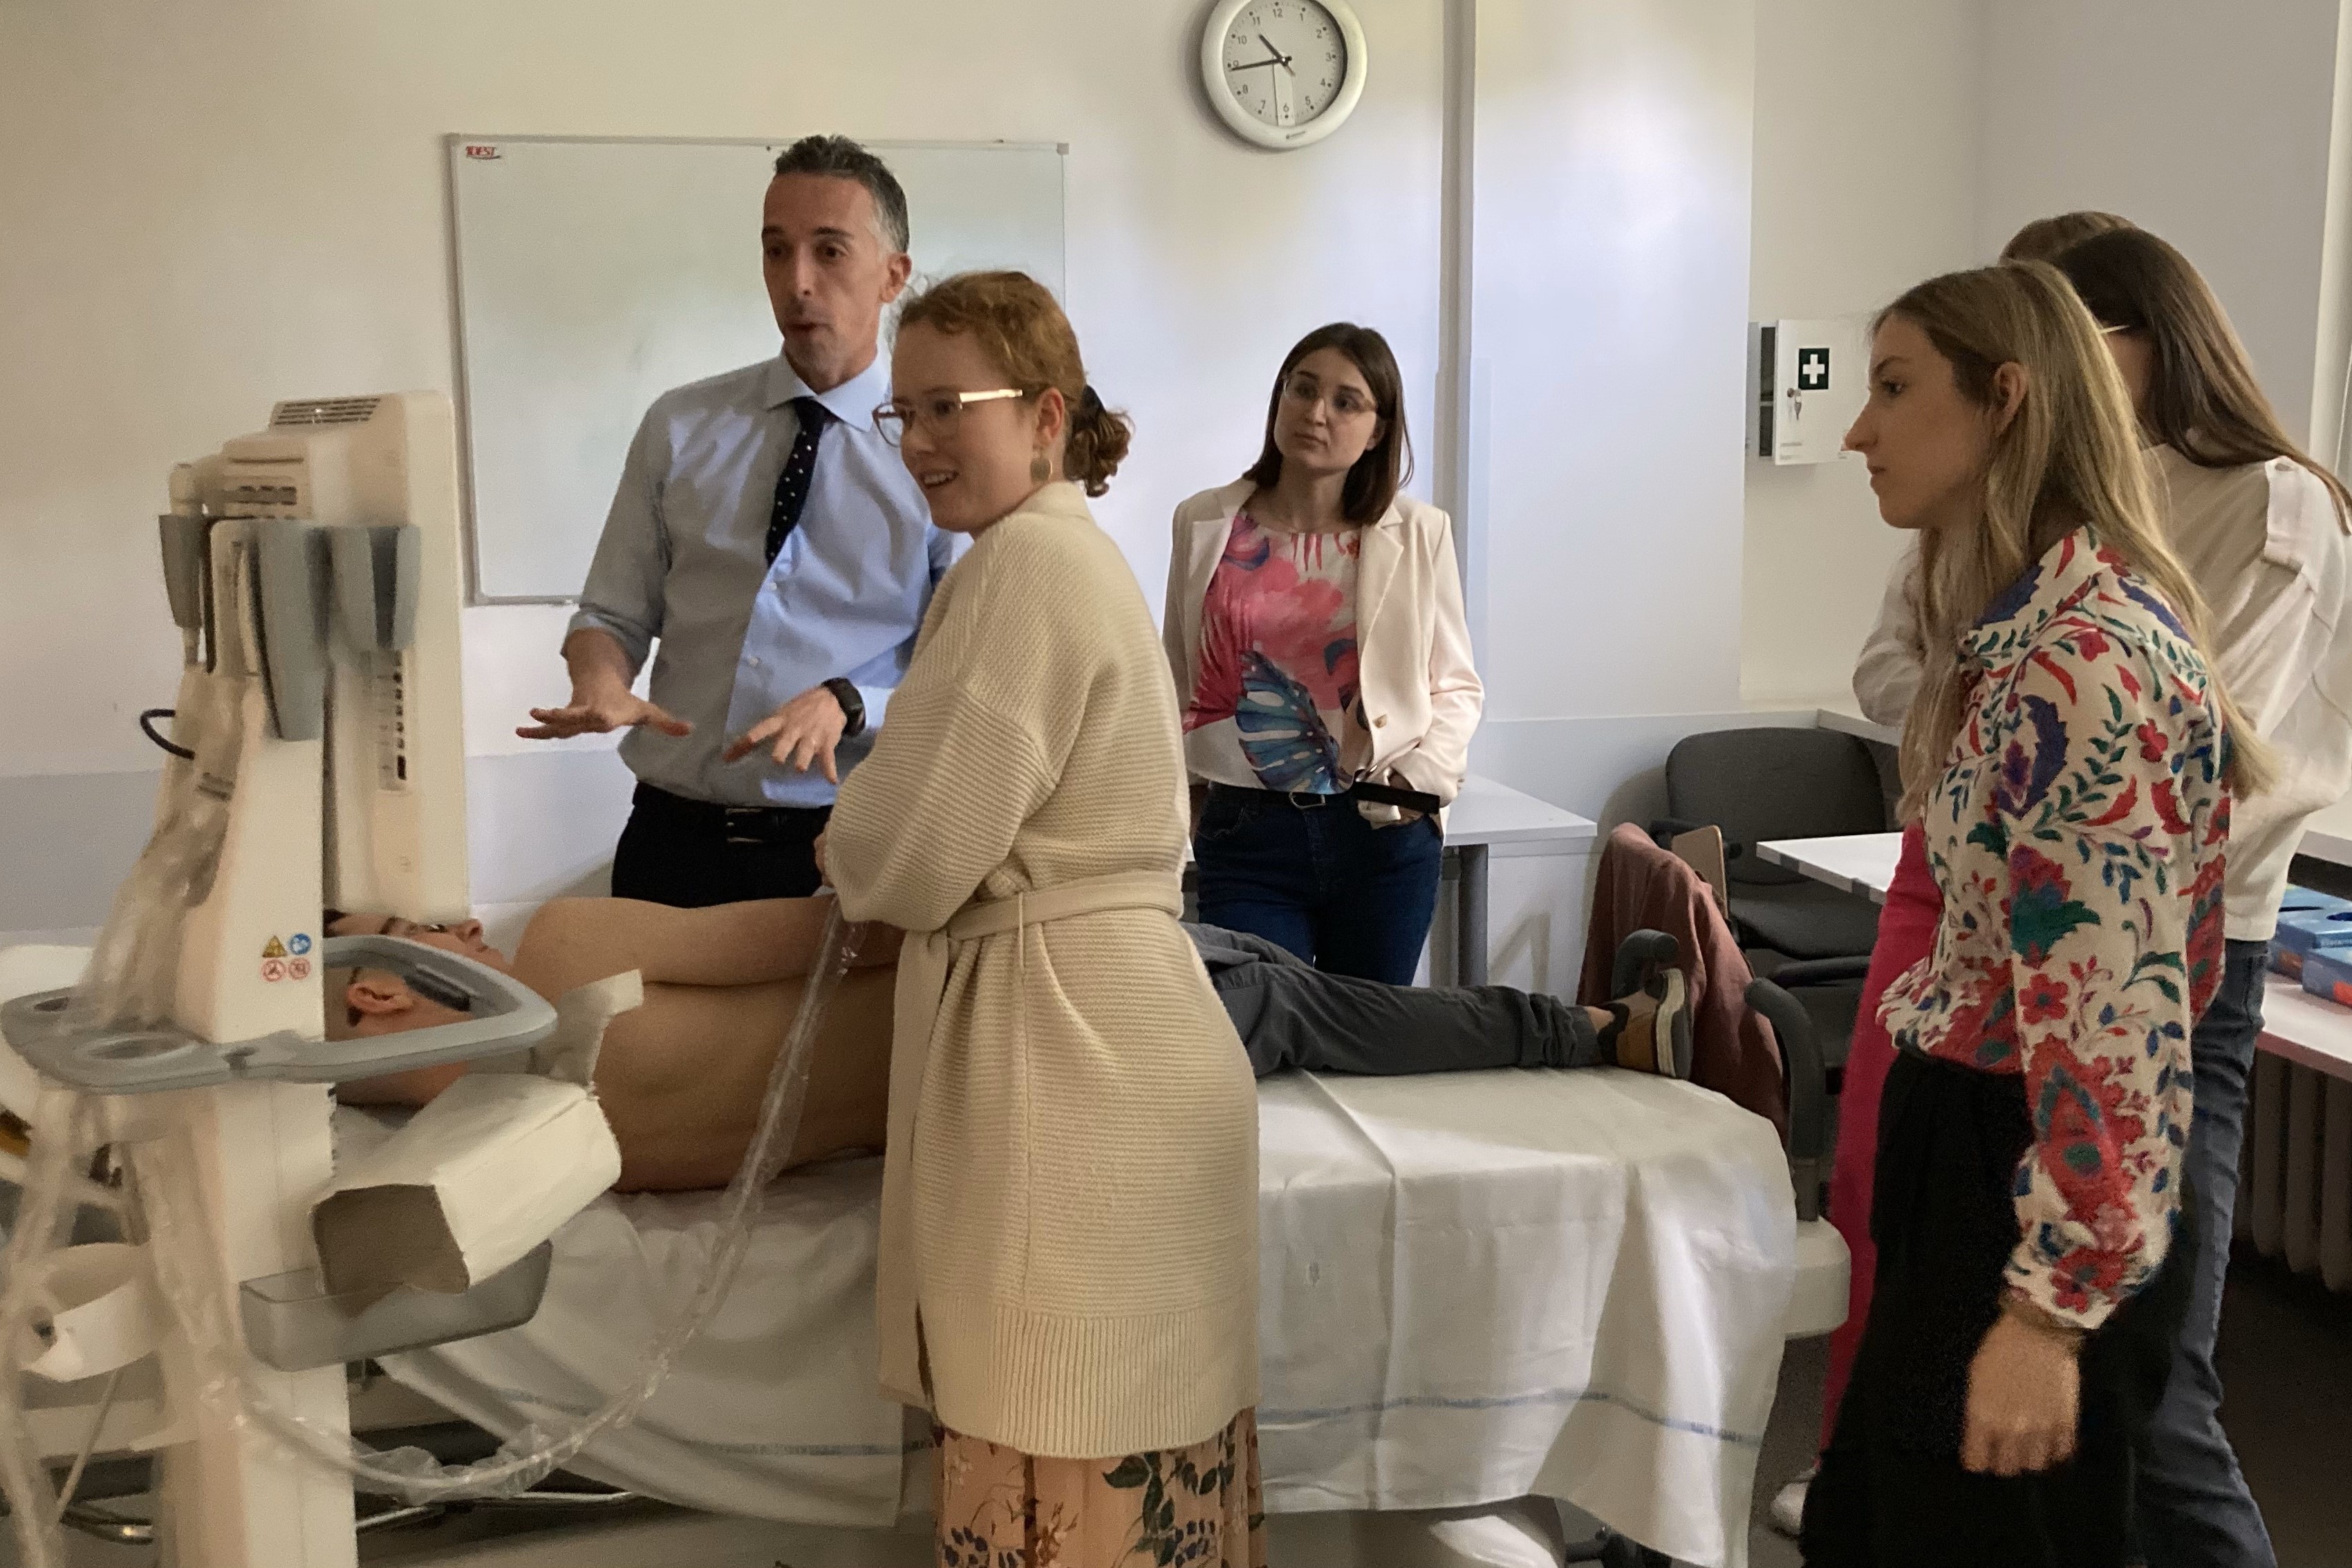 The lecturer - a tall slim man in a blue shirt and six students at the ultrasound camera. Next to the apparatus is a hospital bed on which one of the students lies undressed from the waist up. A female student is performing an ultrasound on him.